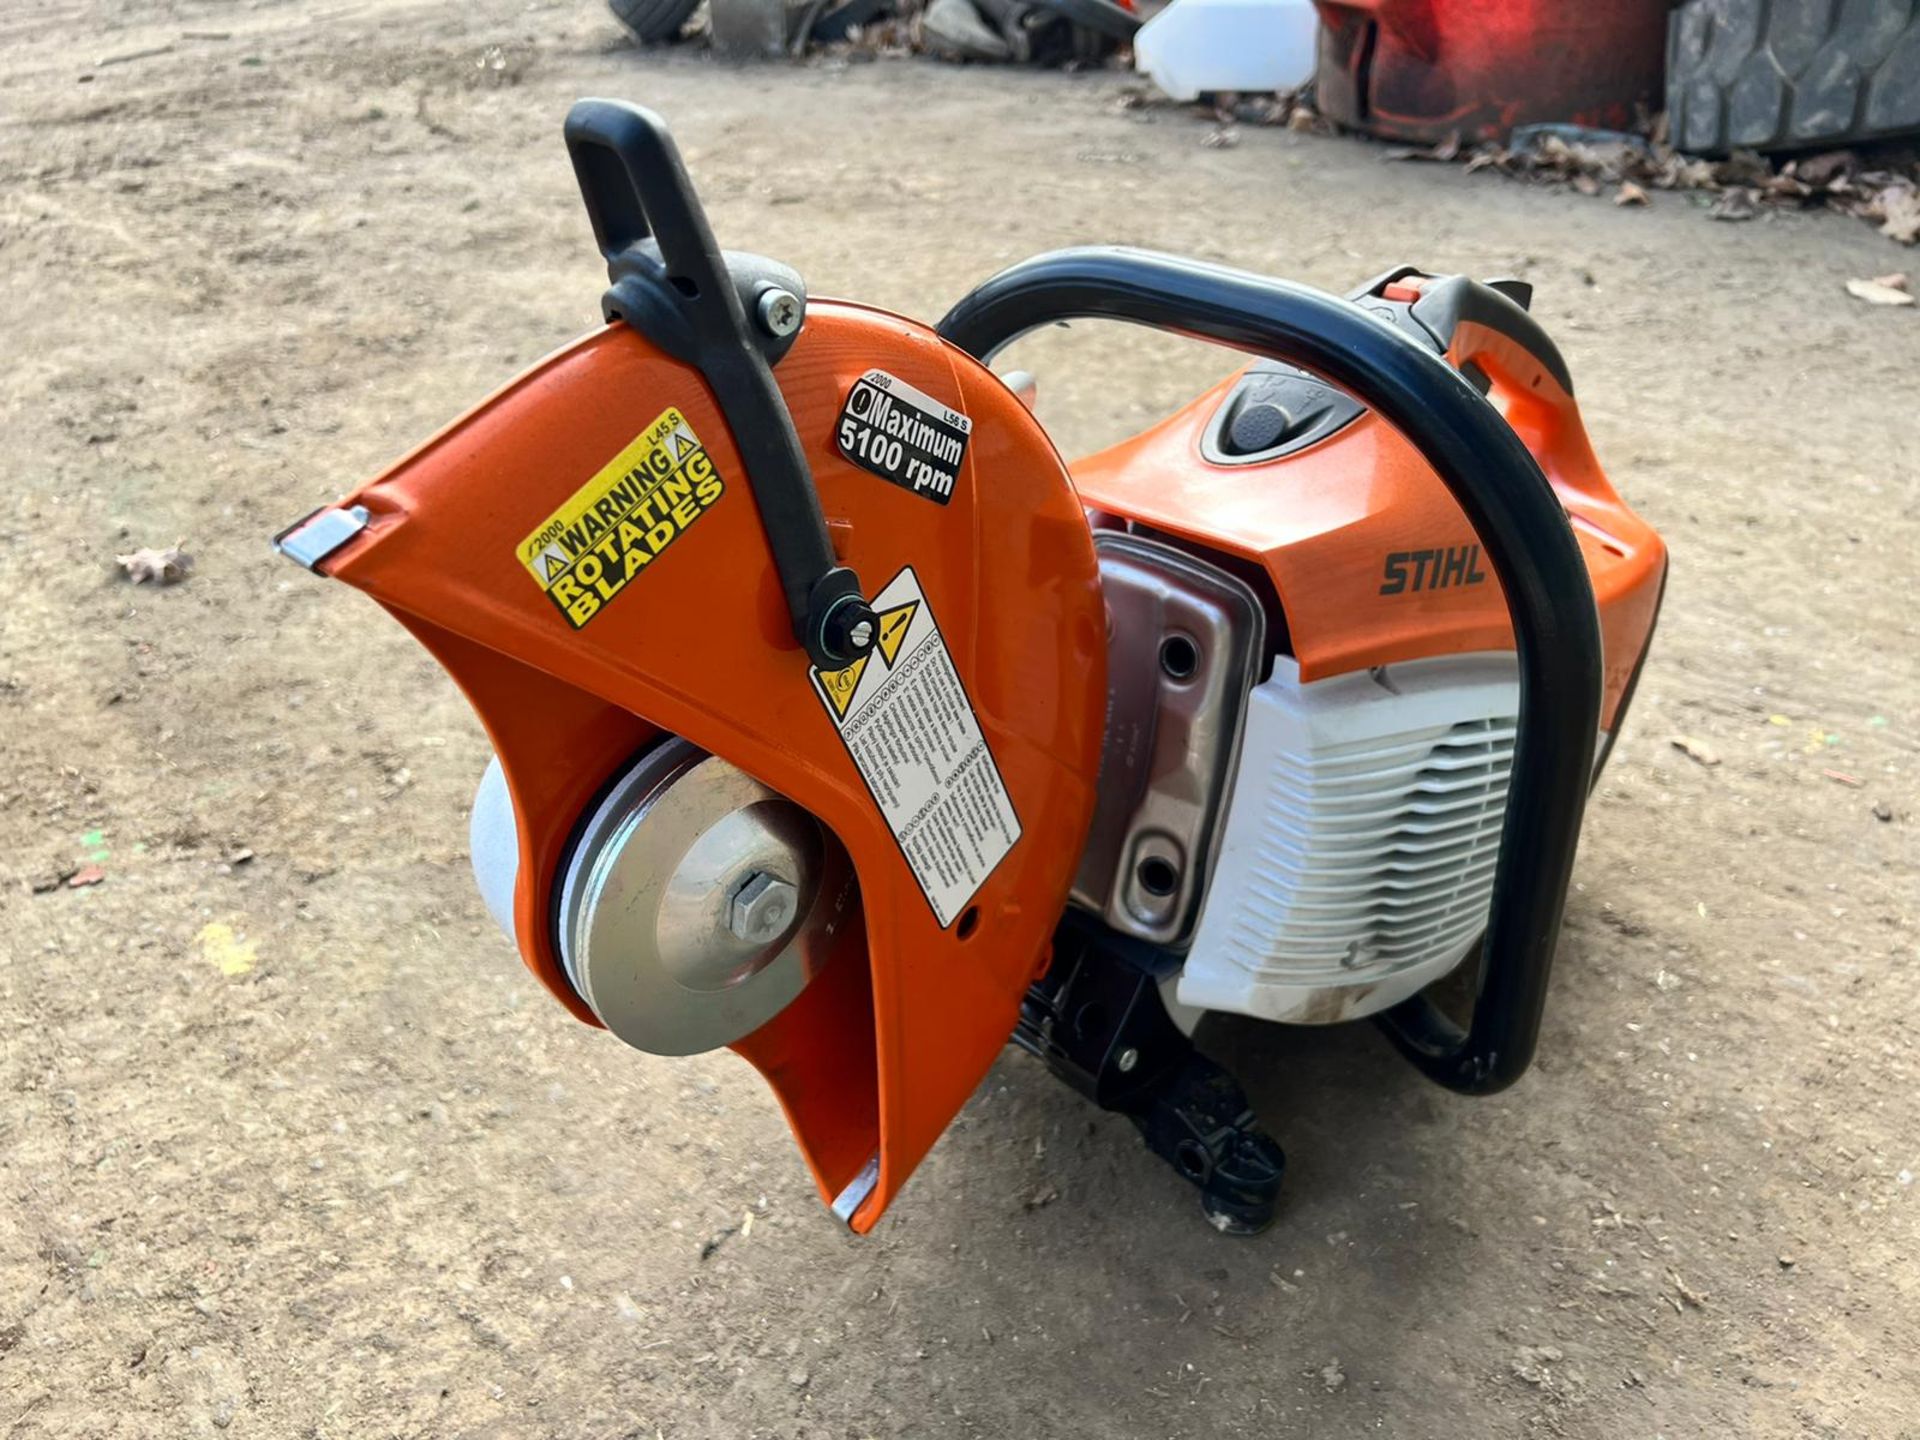 NEW AND UNUSED STIHL TS410 PETROL DISC CUTTER, MANUFACTURED 11/2021, C/W NEW 12" DIAMOND BLADE - Image 4 of 8